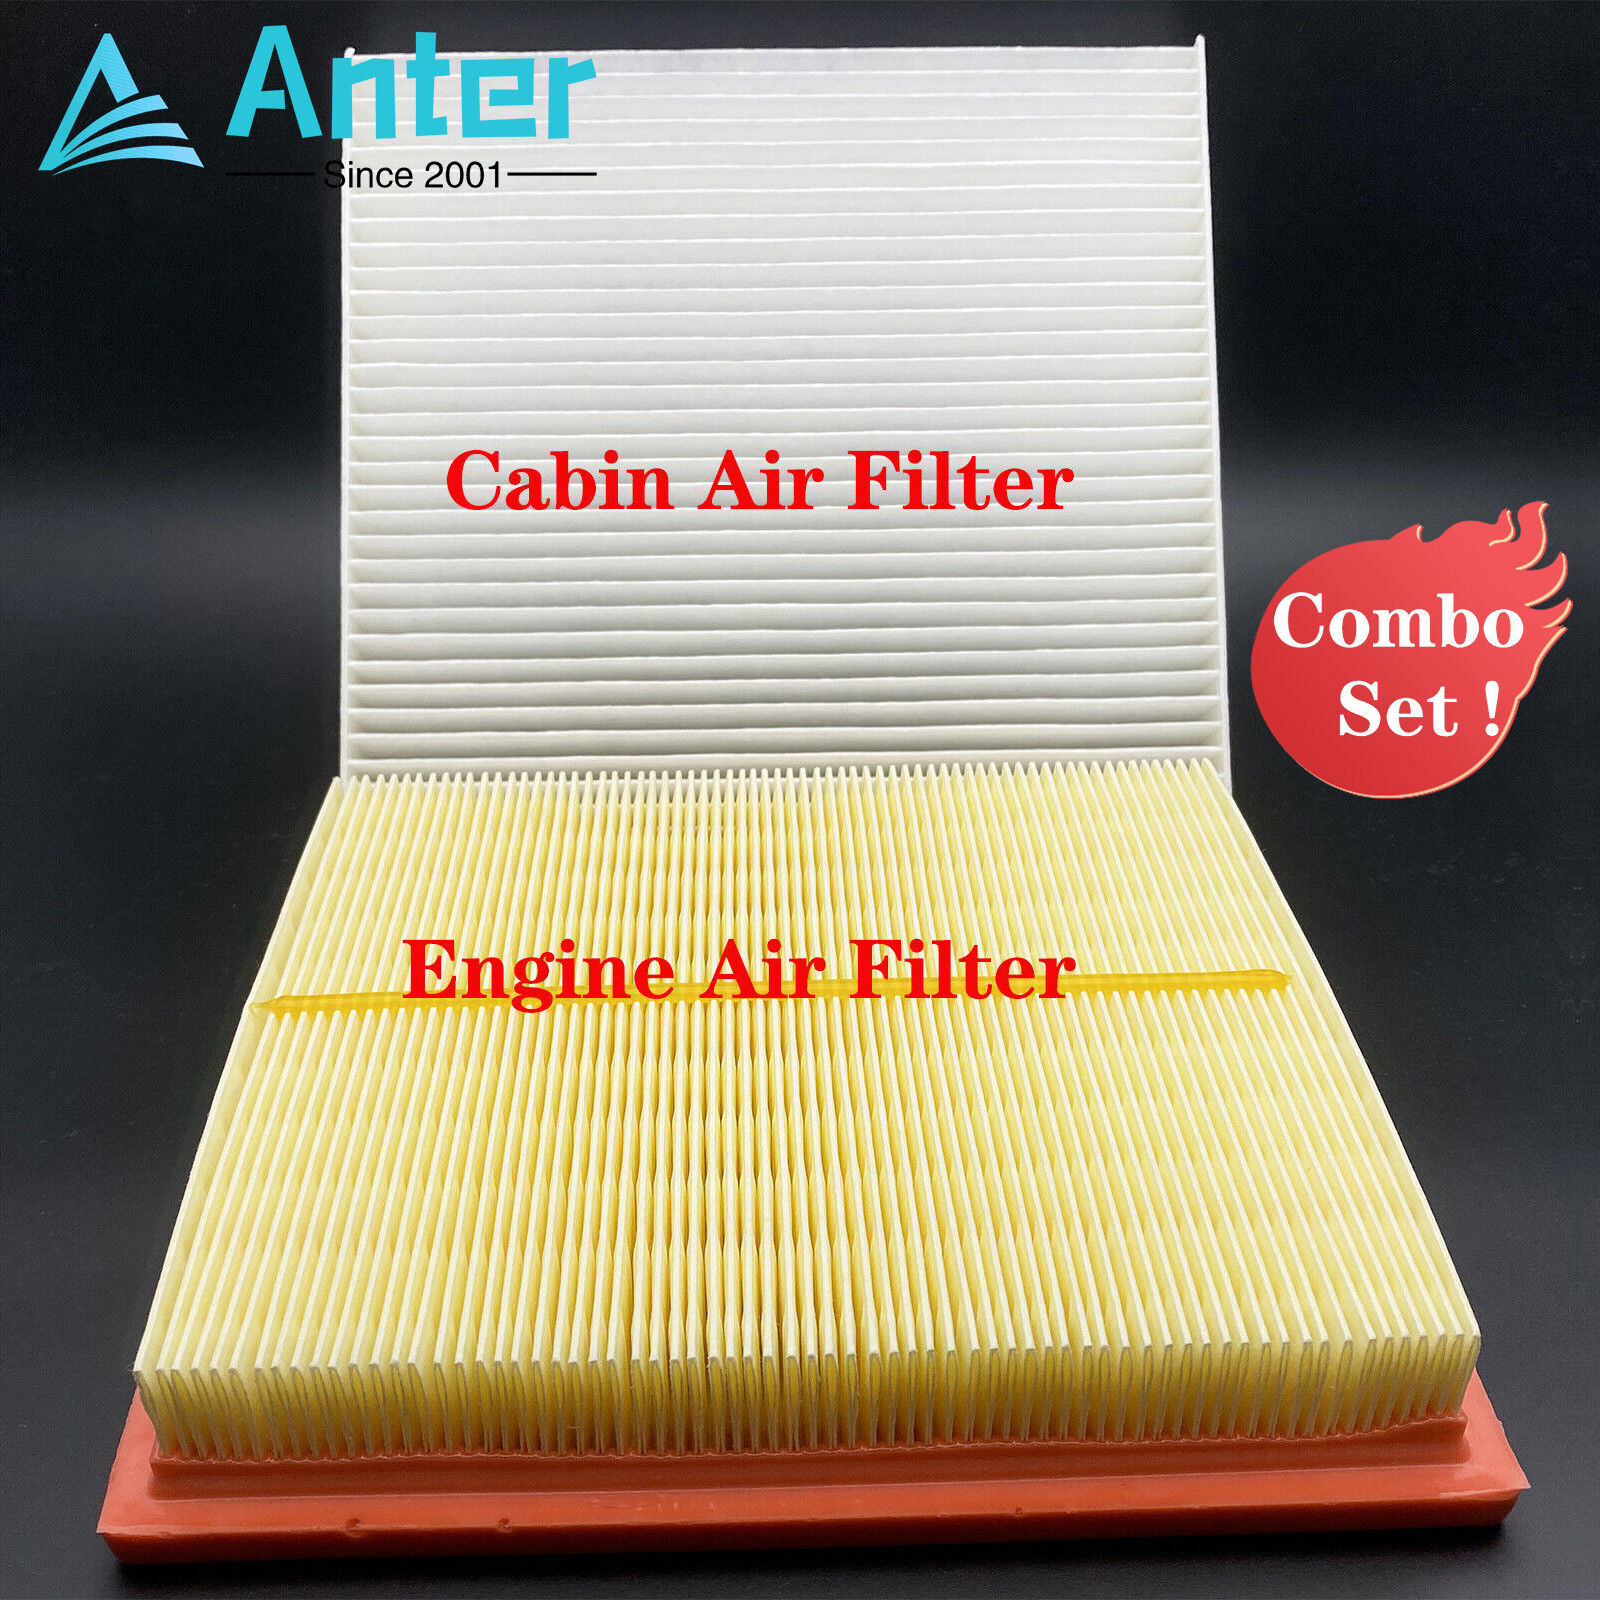 NEW ENGINE & CABIN AIR FILTER For PRIUS Hybrid PRIUS V CT200H NX300H 17801-37020